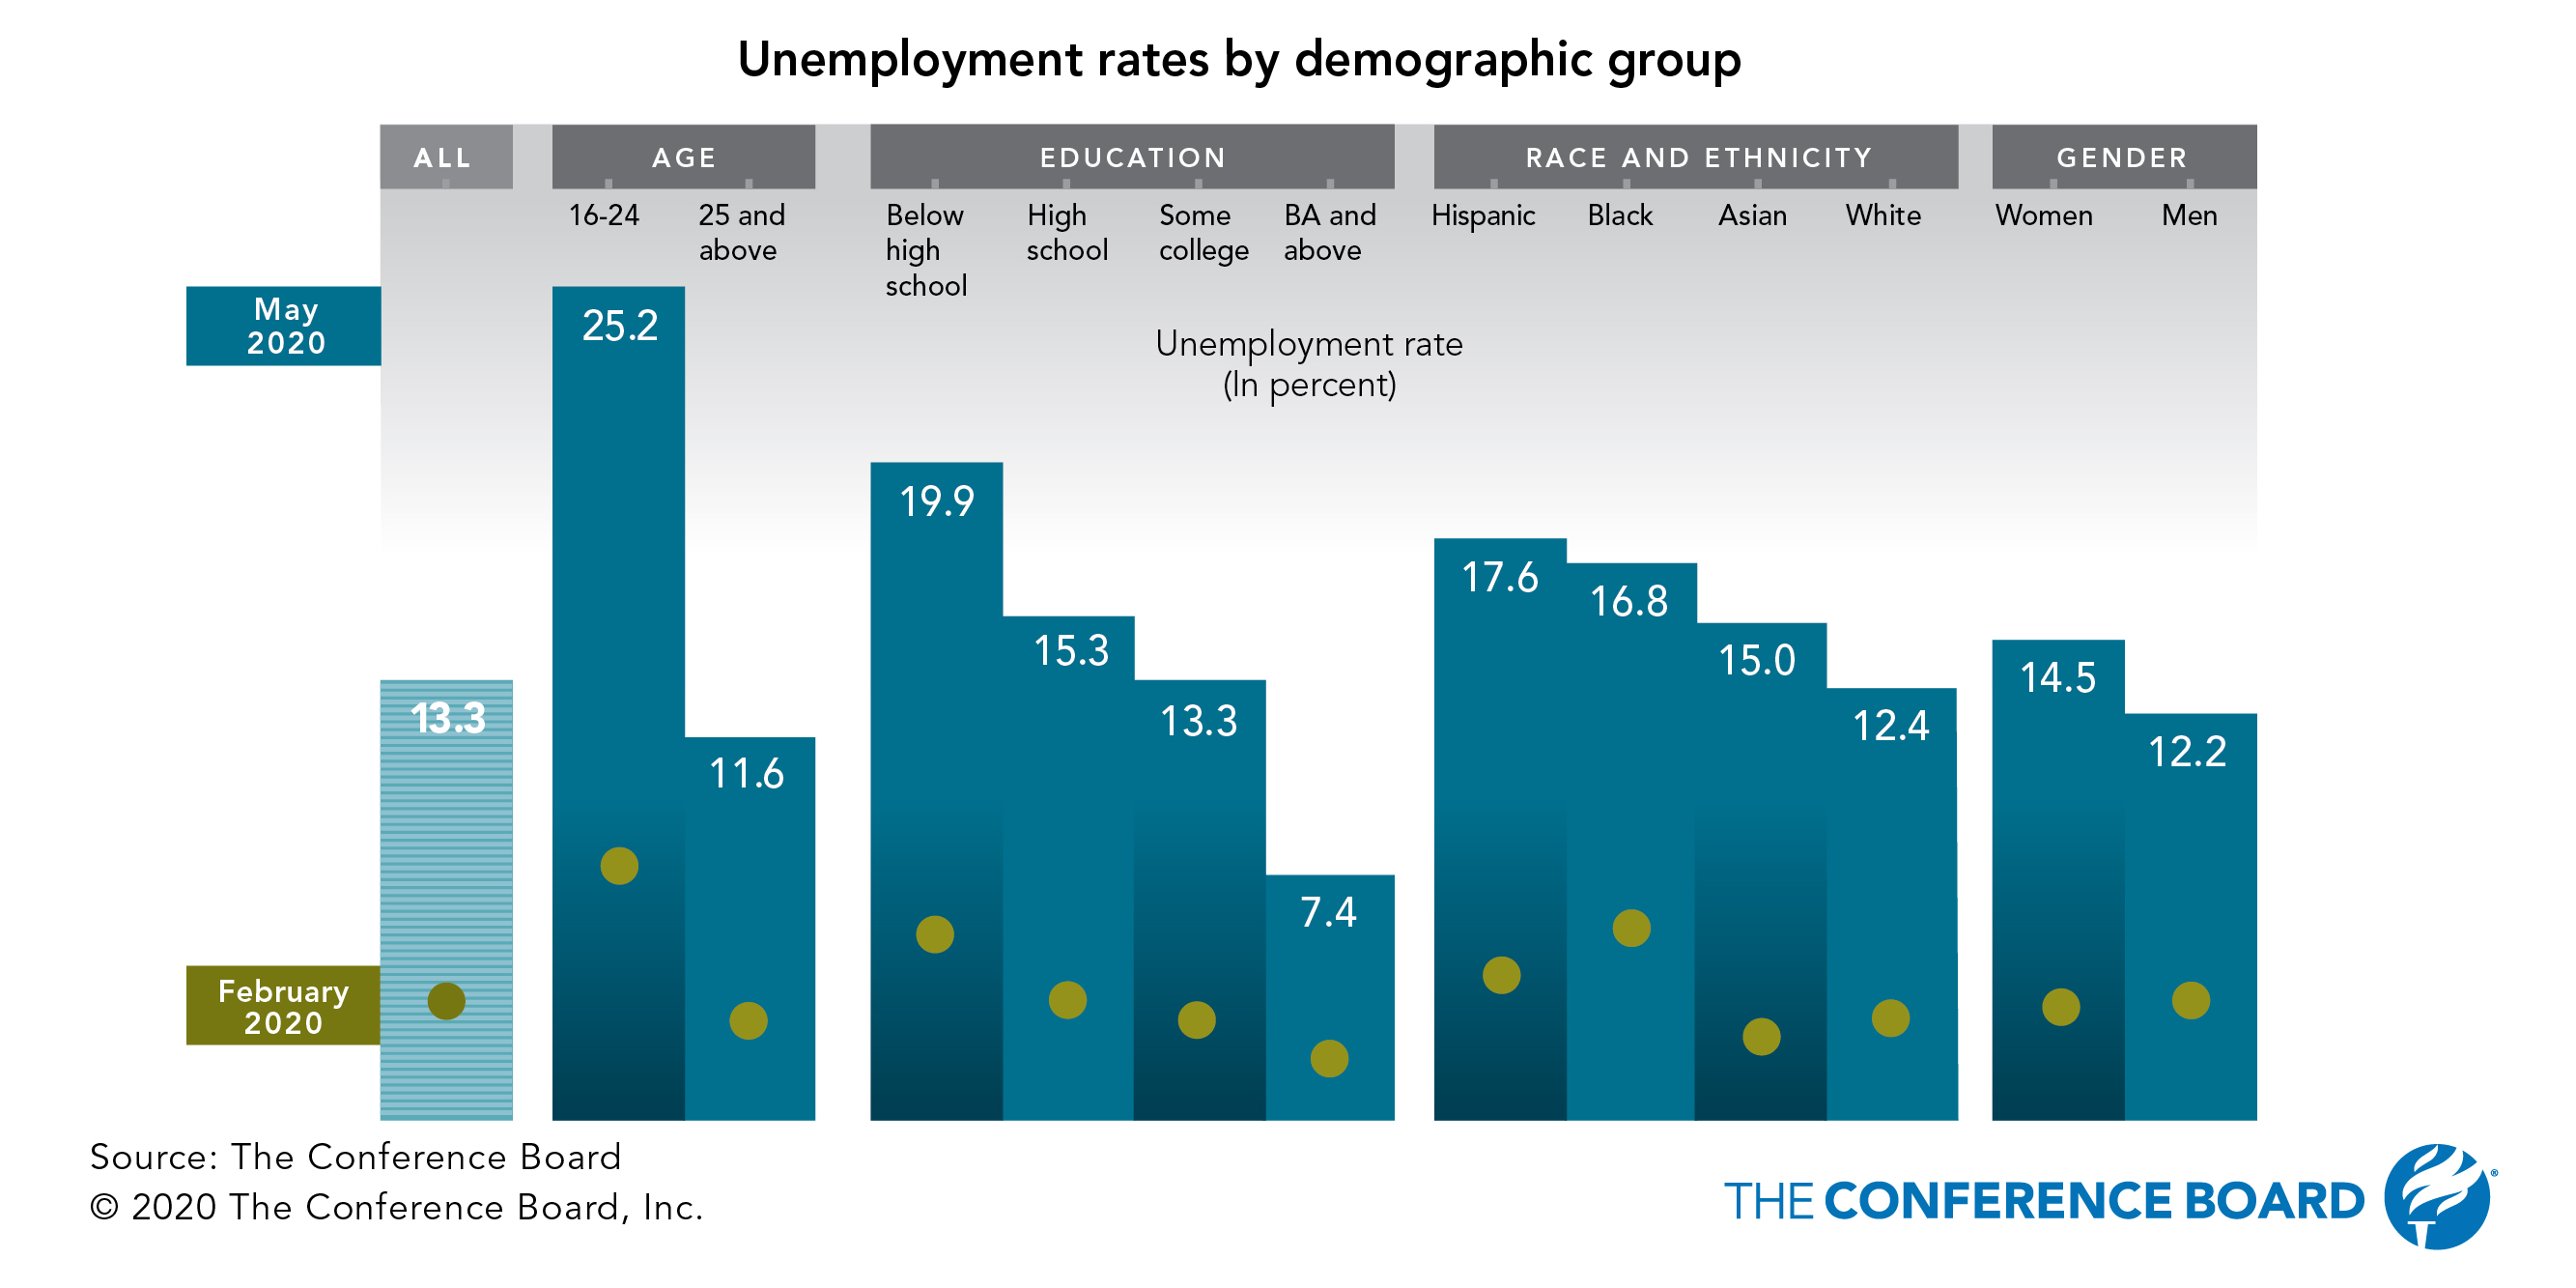 Jobs report: The young, Hispanics, women, and those with less education hit hardest